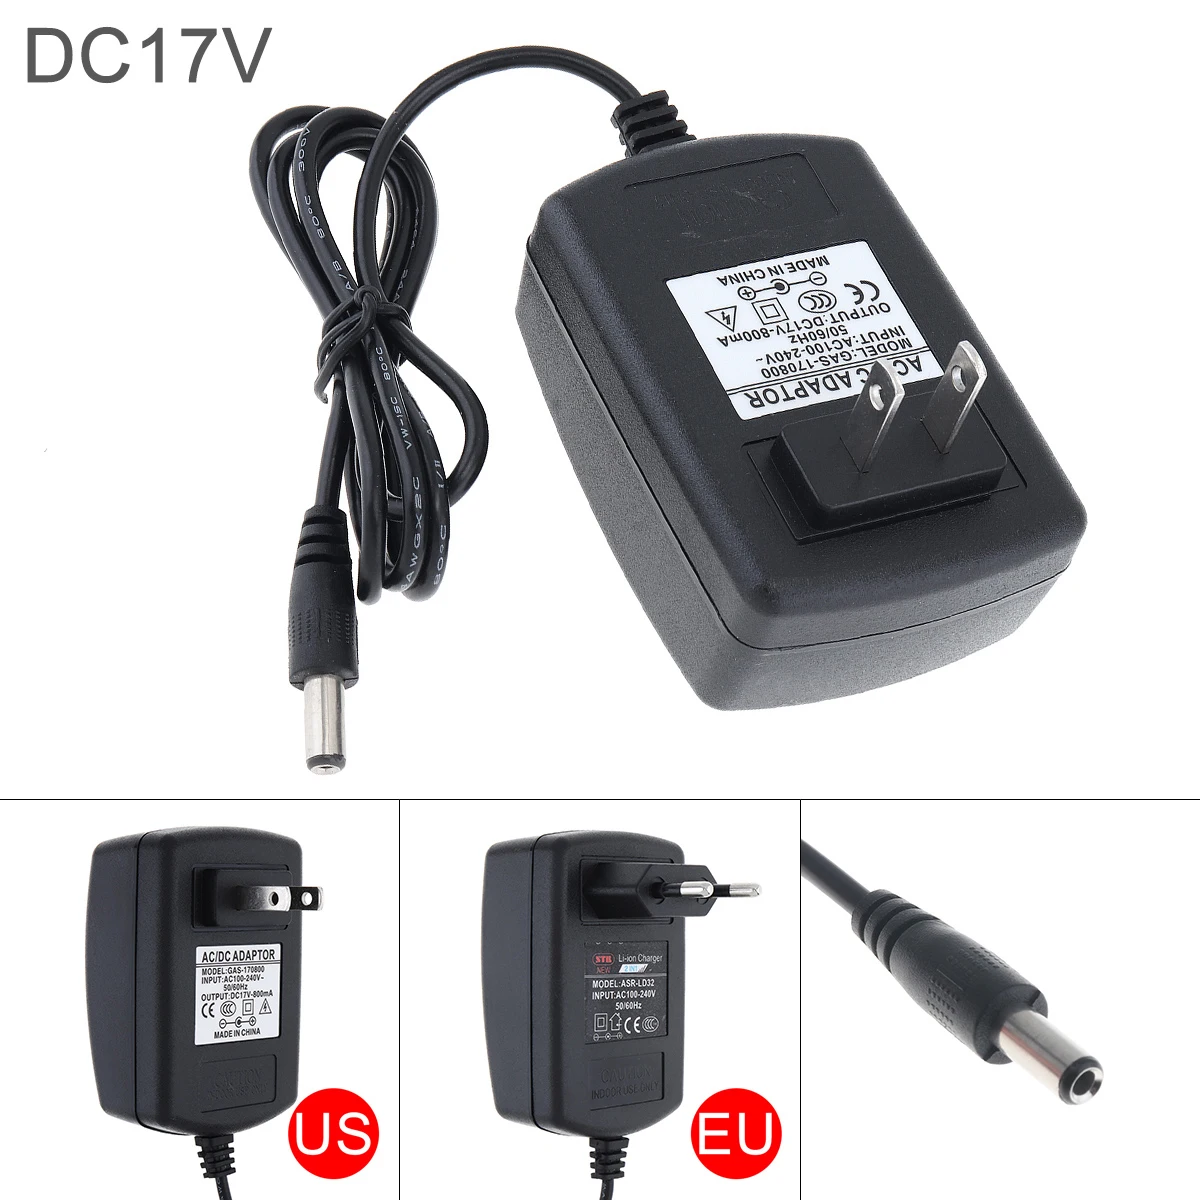 80cm Universal DC 16.8-17V Lithium Battery Rechargeable Charger 100-240V Power Supply for Lithium Electrical Drill Screwdriver ramway rhc1550 3 6v lithium battery rechargeable intelligent water meter flowmeter etc device positioner universal battery